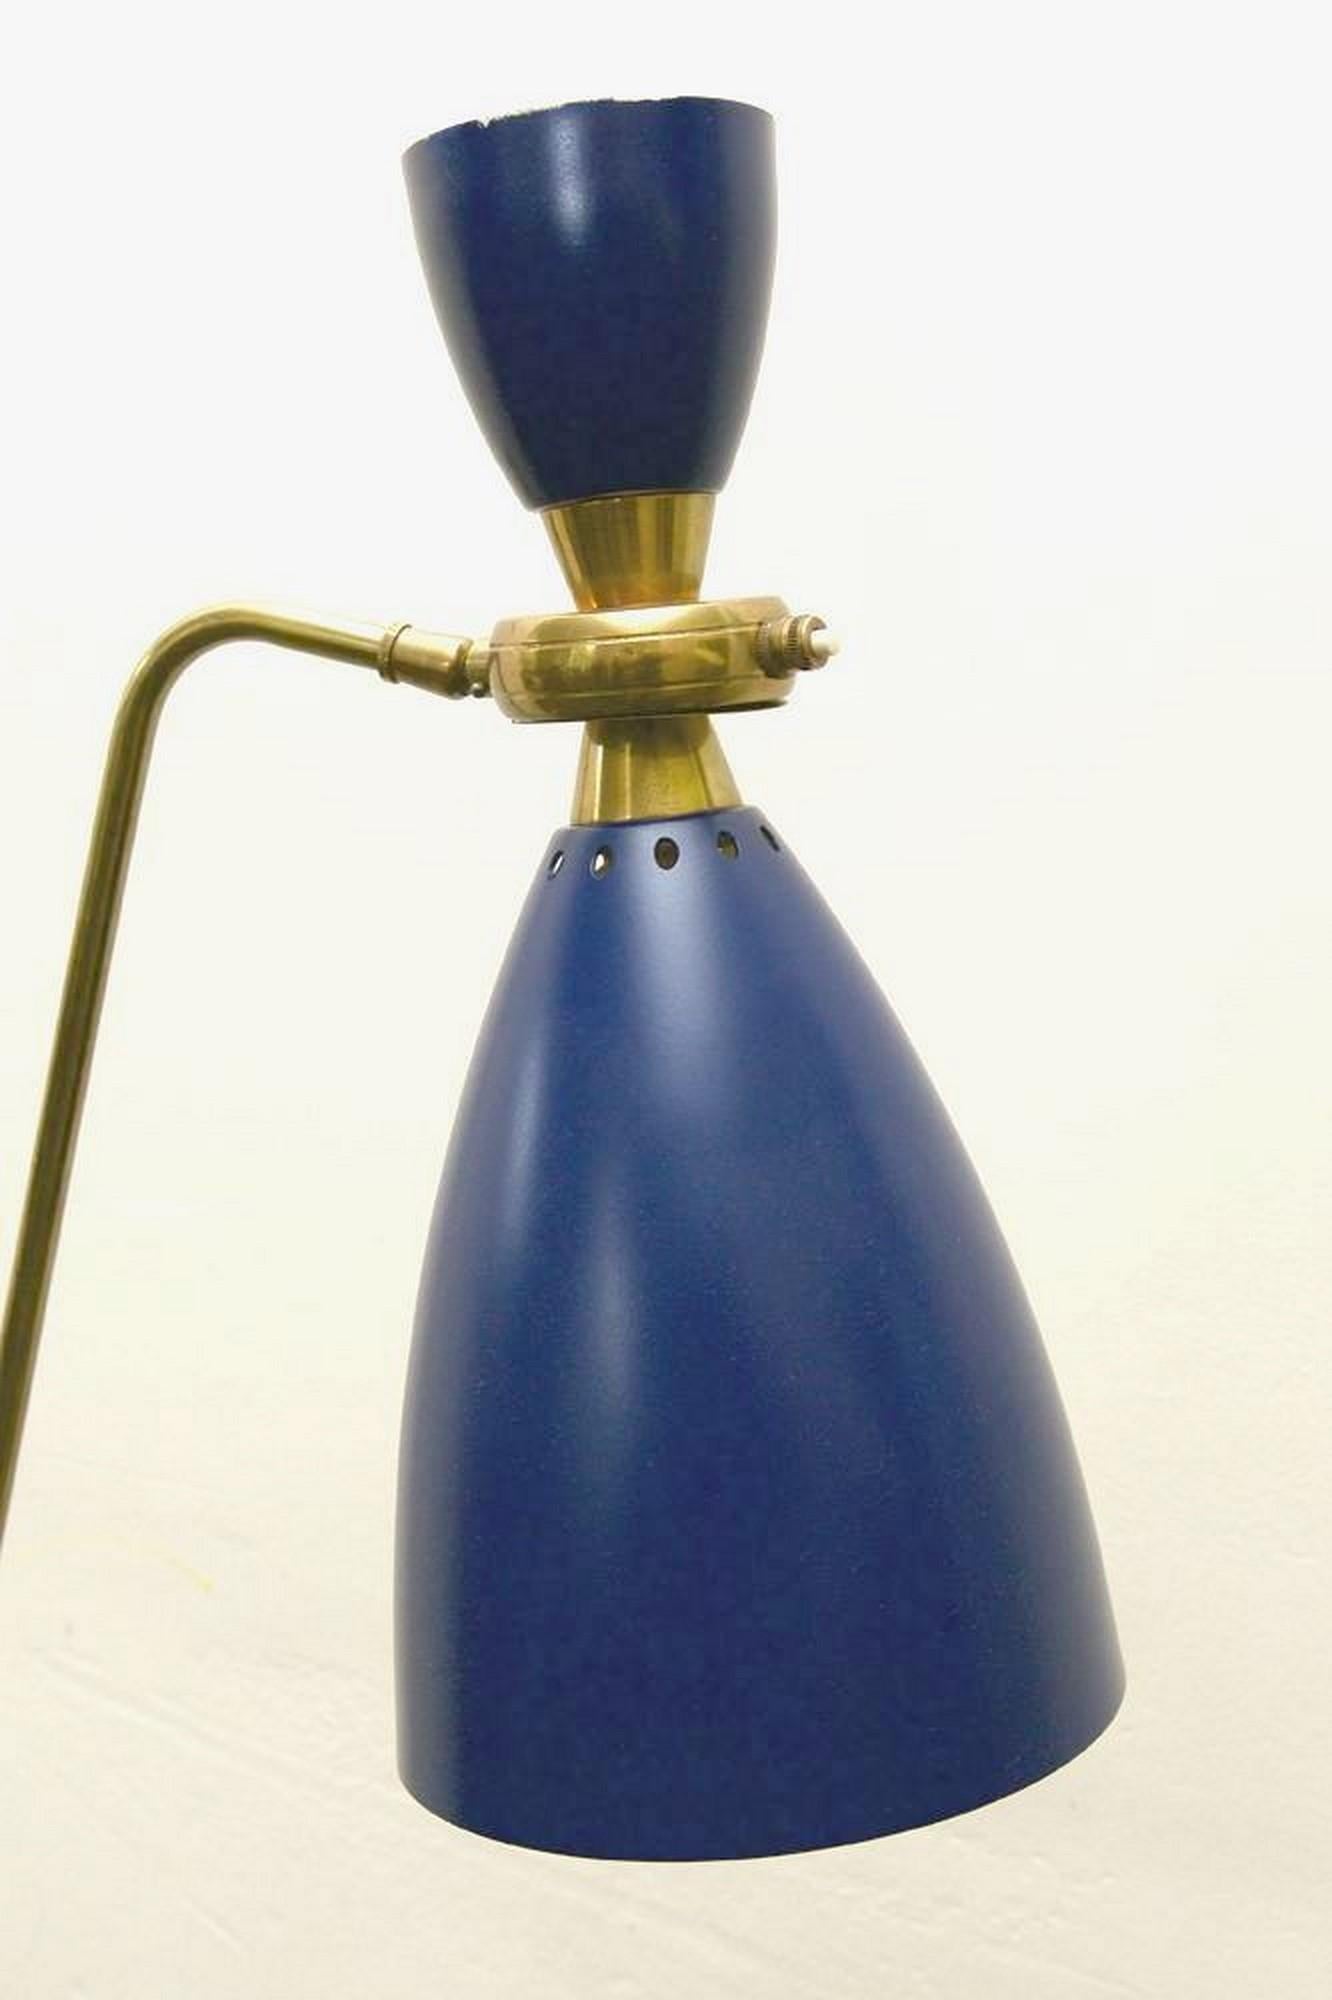 French floor lamp with simple articulated blue lacquered aluminium shade, and brass and black lacquered metal stem which is height regulatable.